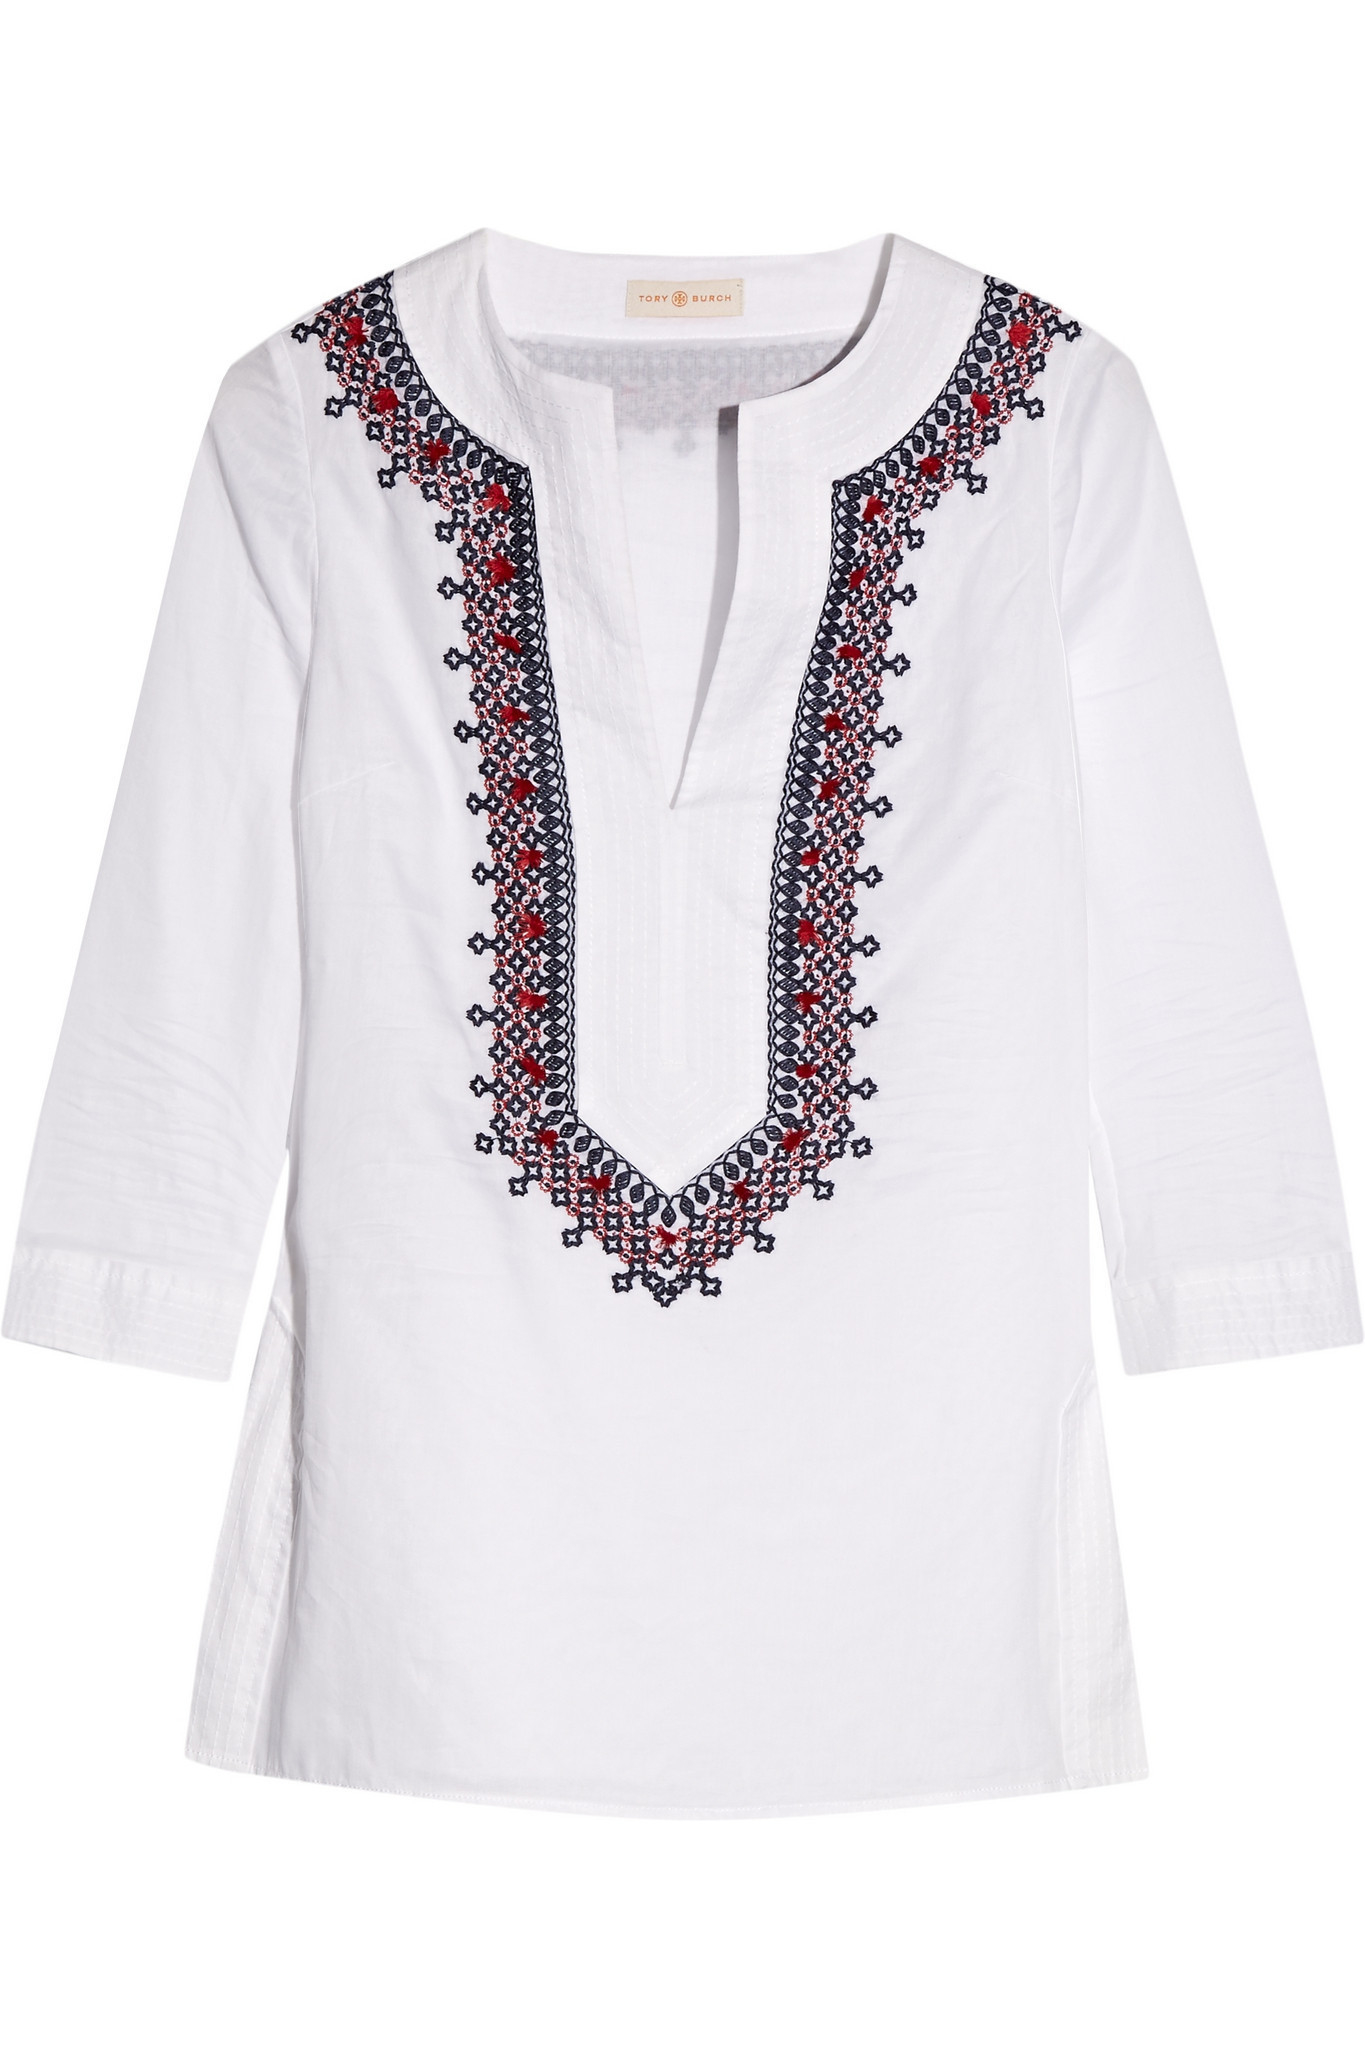 Tory Burch Embroidered Cotton Tunic in White - Lyst